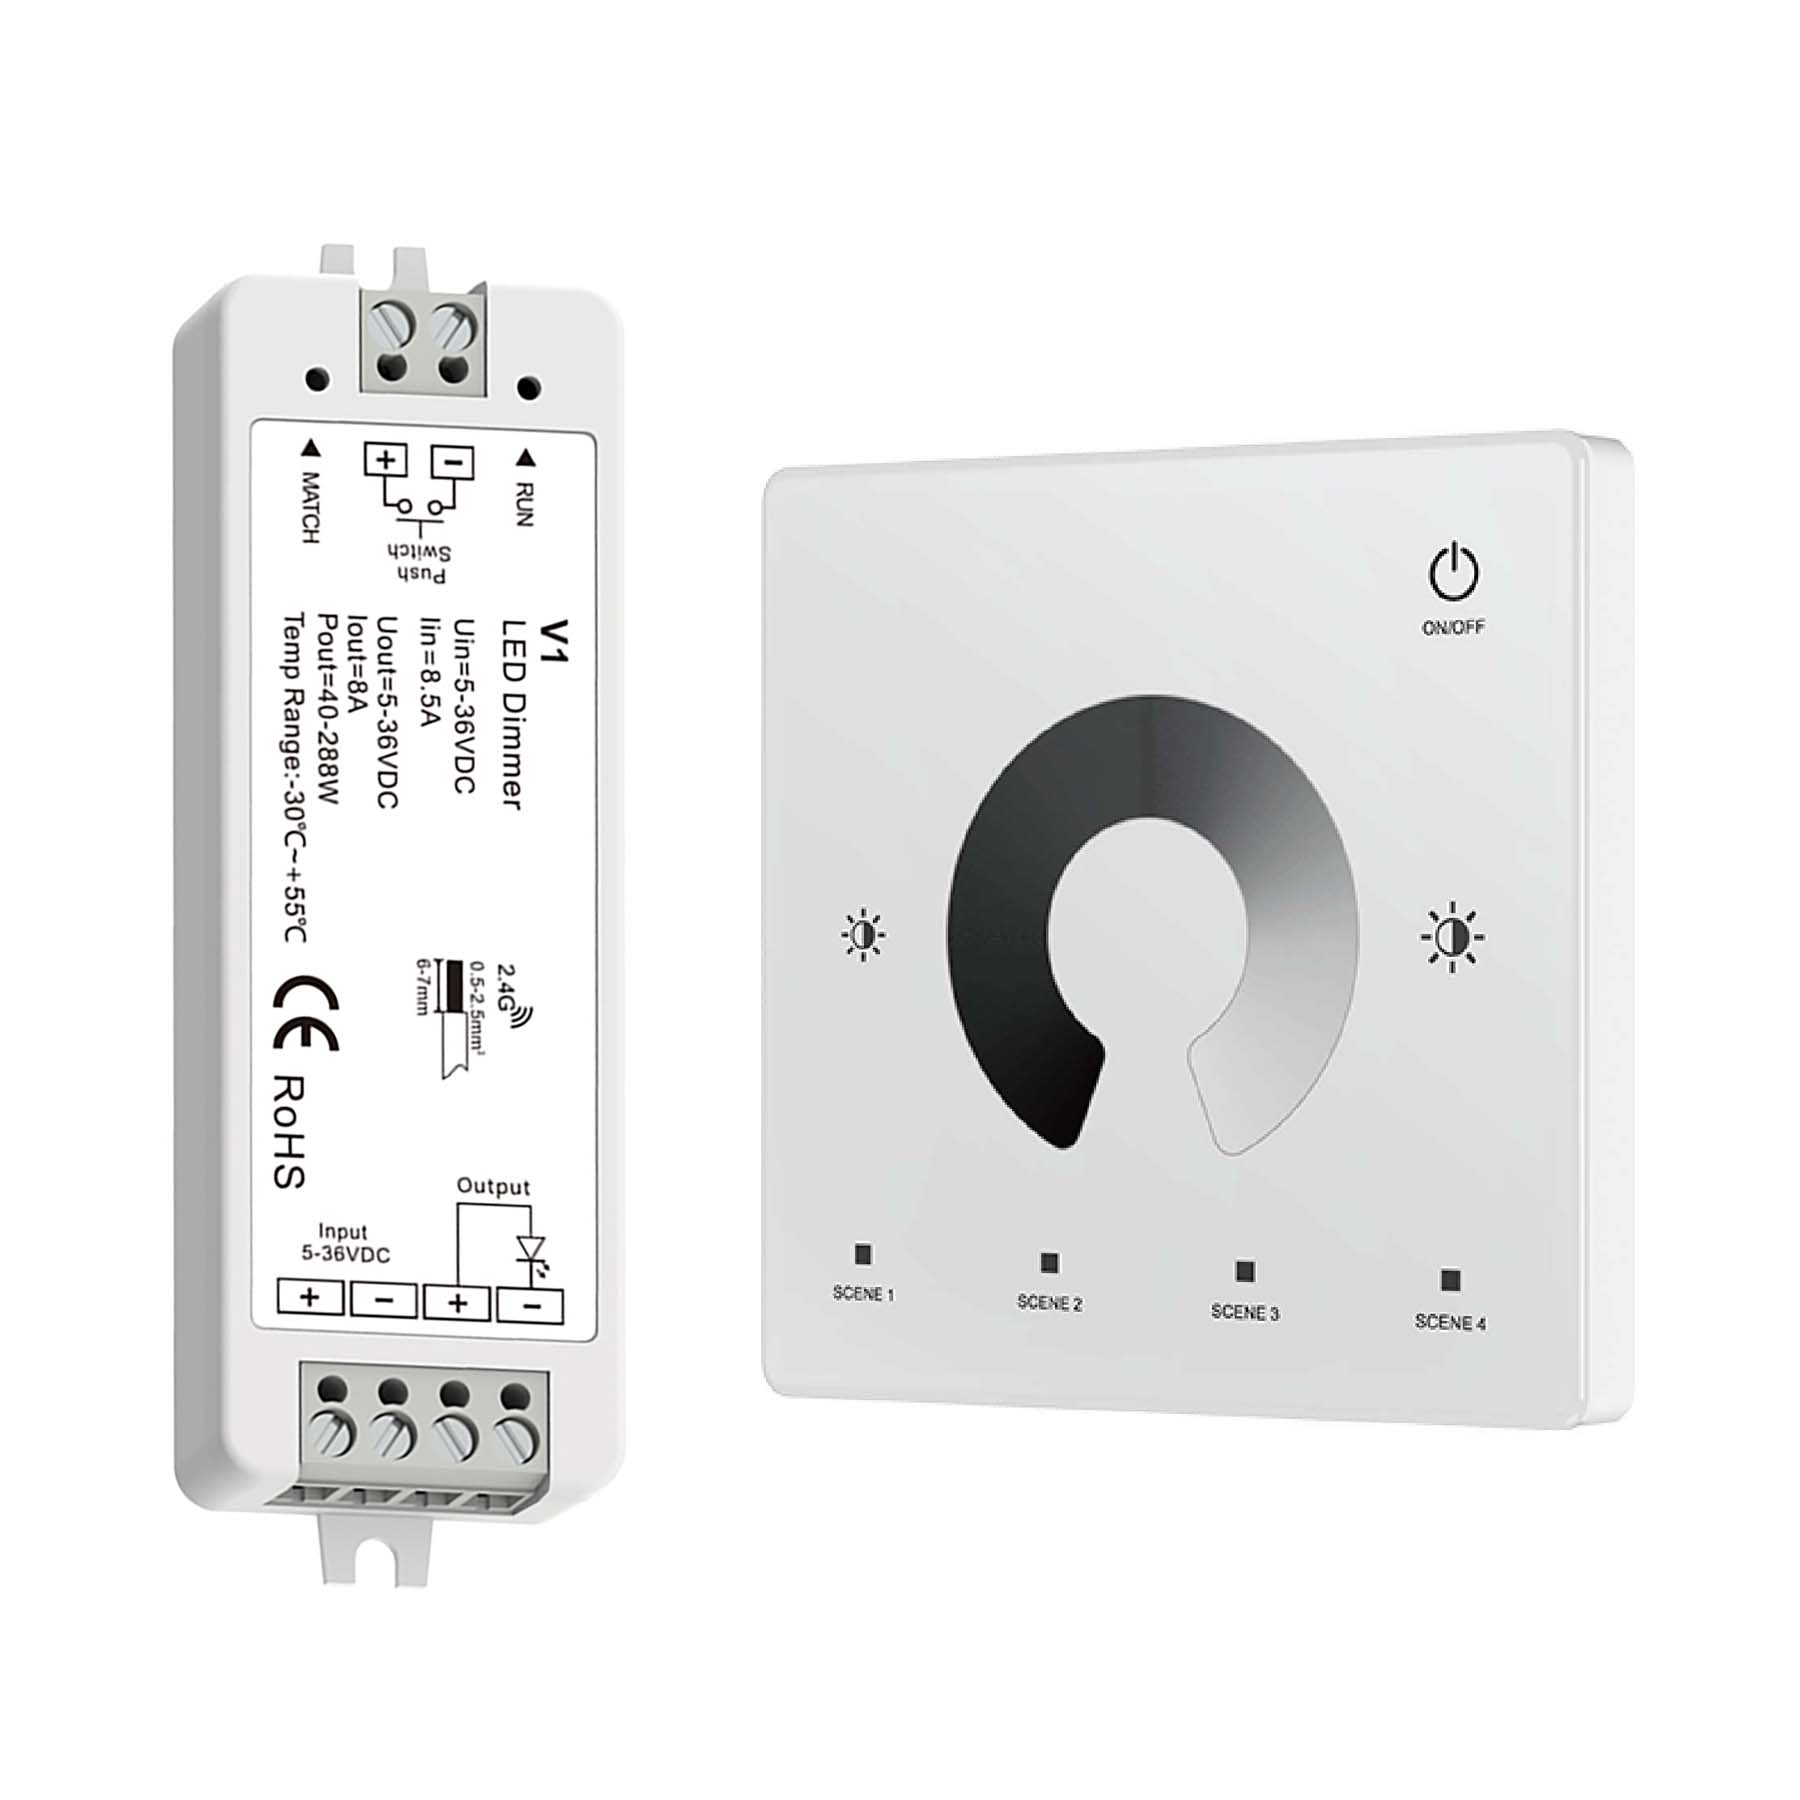 G.W.S. LED LED 5-36V DC Dimming Controller V1 + 1 Zone Panel Remote Control 1*CR2032 Battery TW1